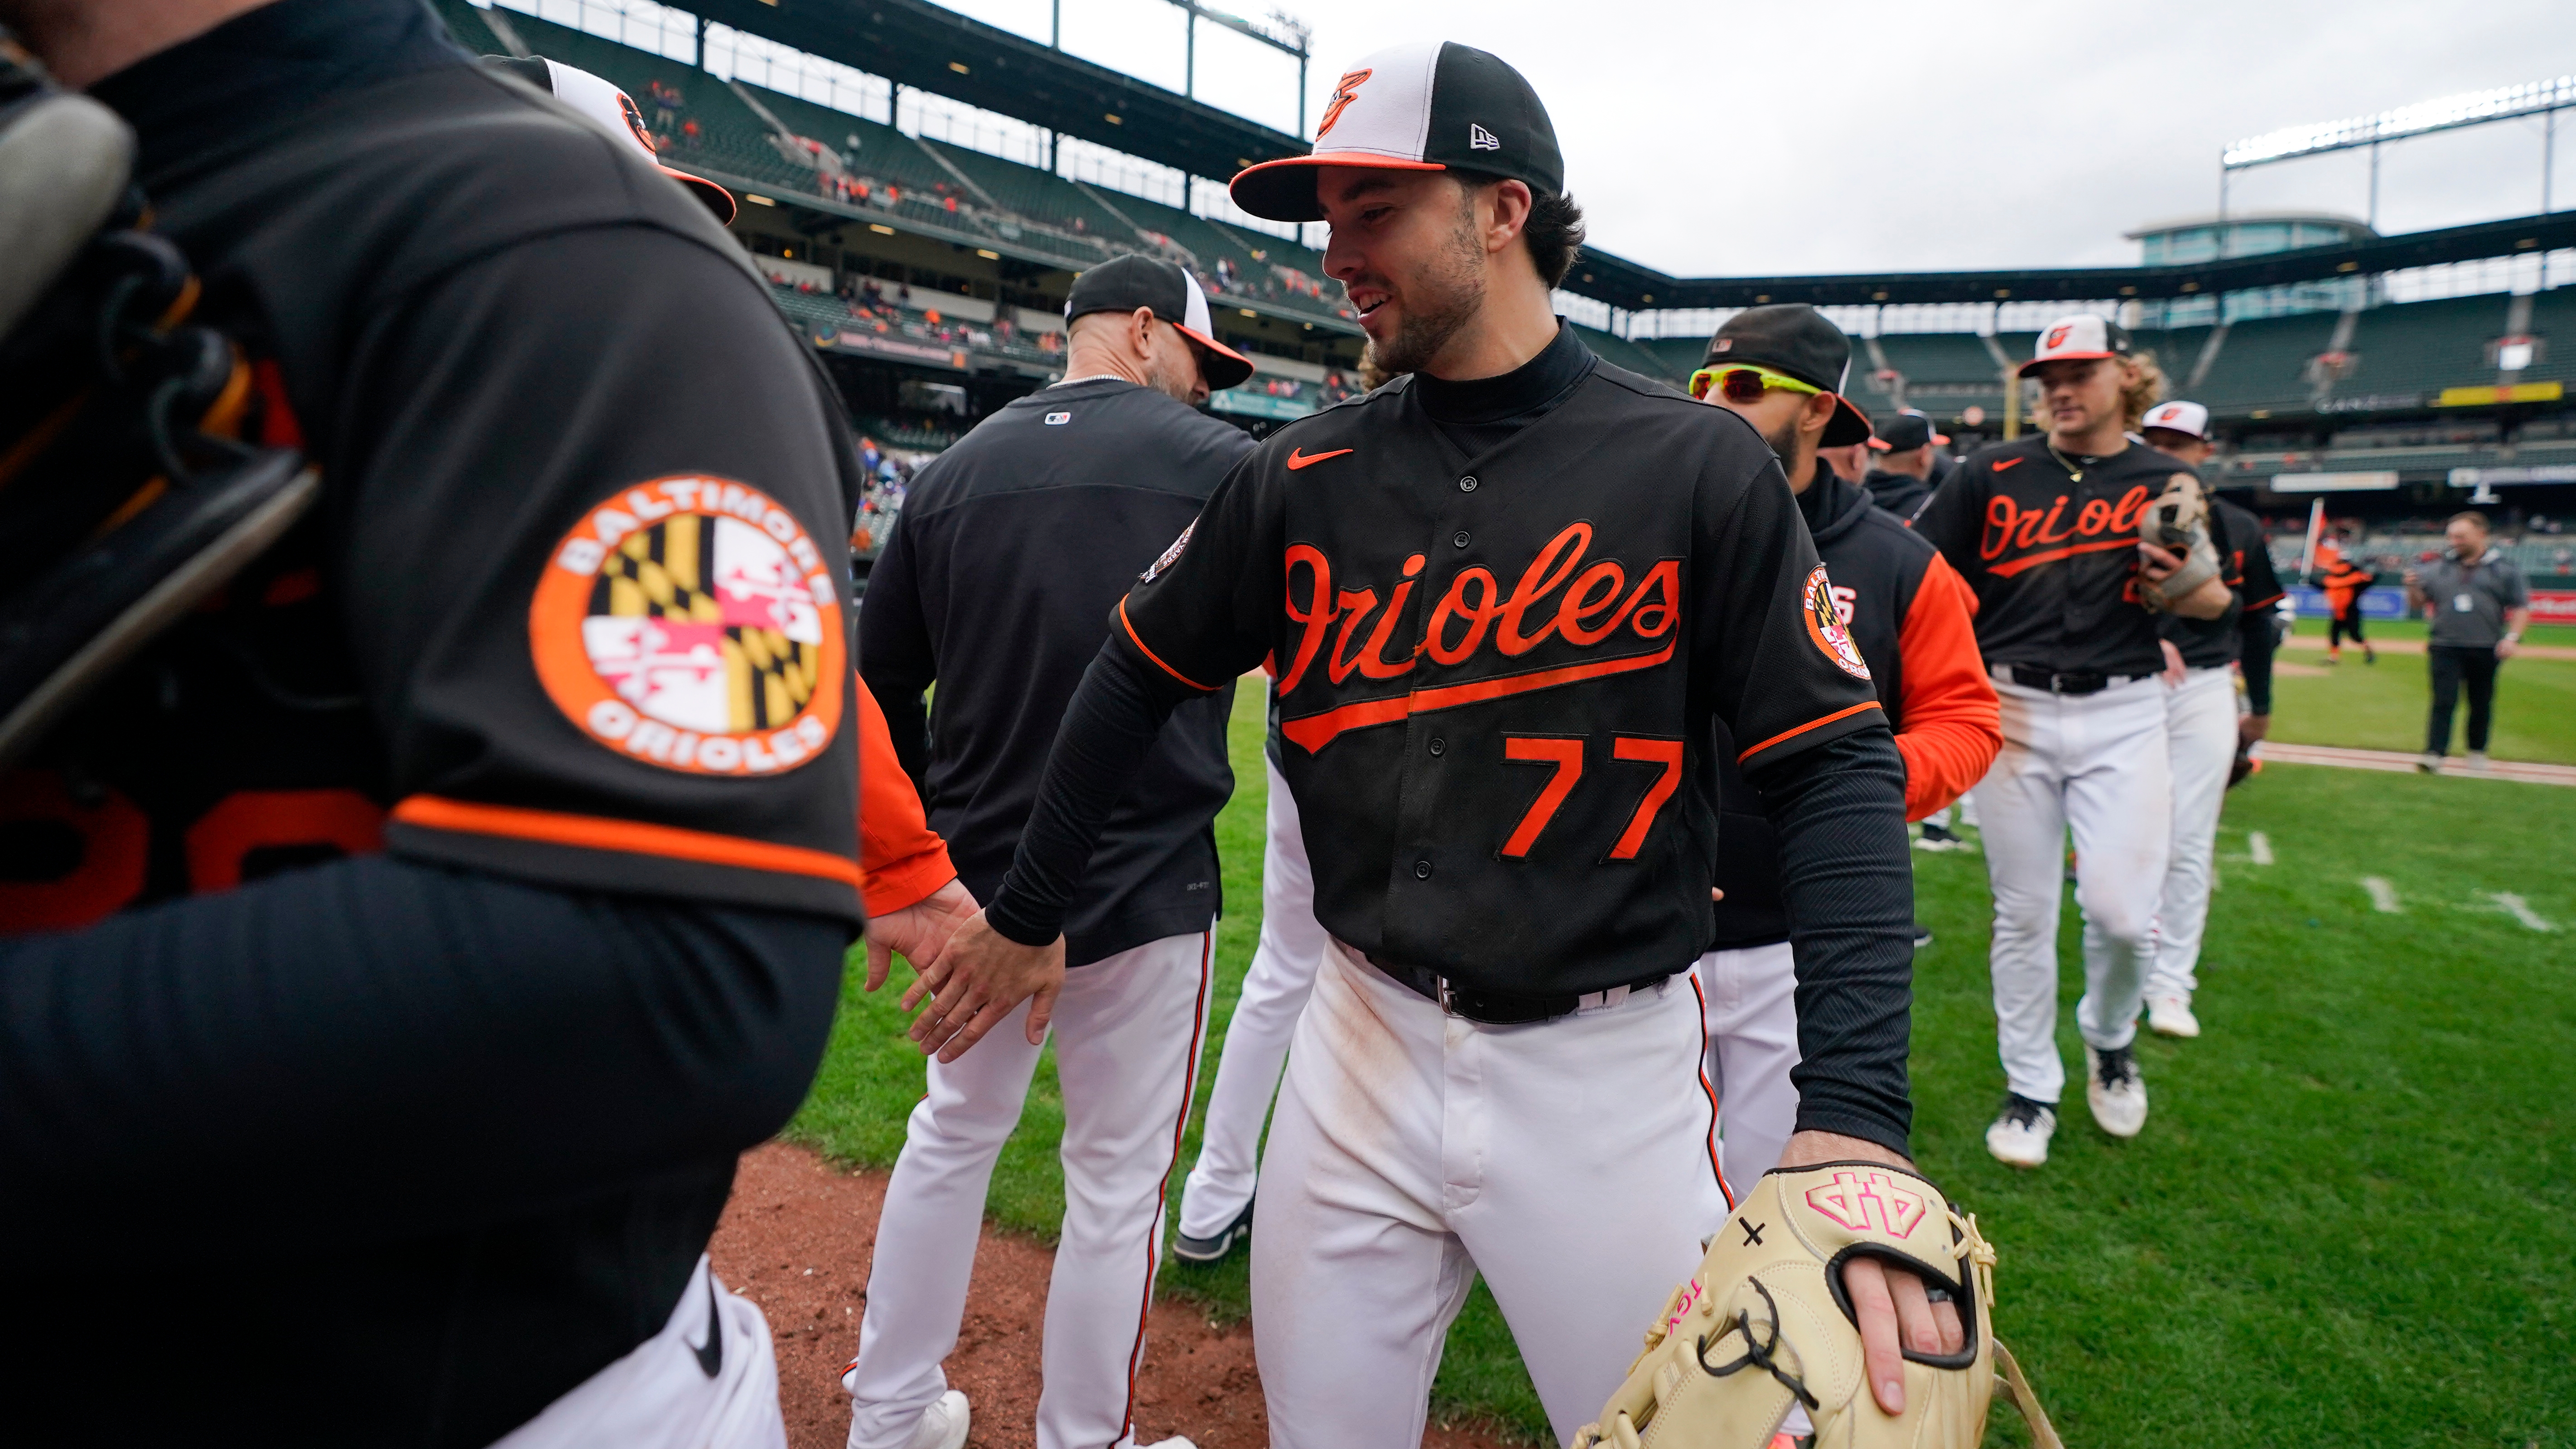 The Orioles have rolled out some unique uniform iterations over